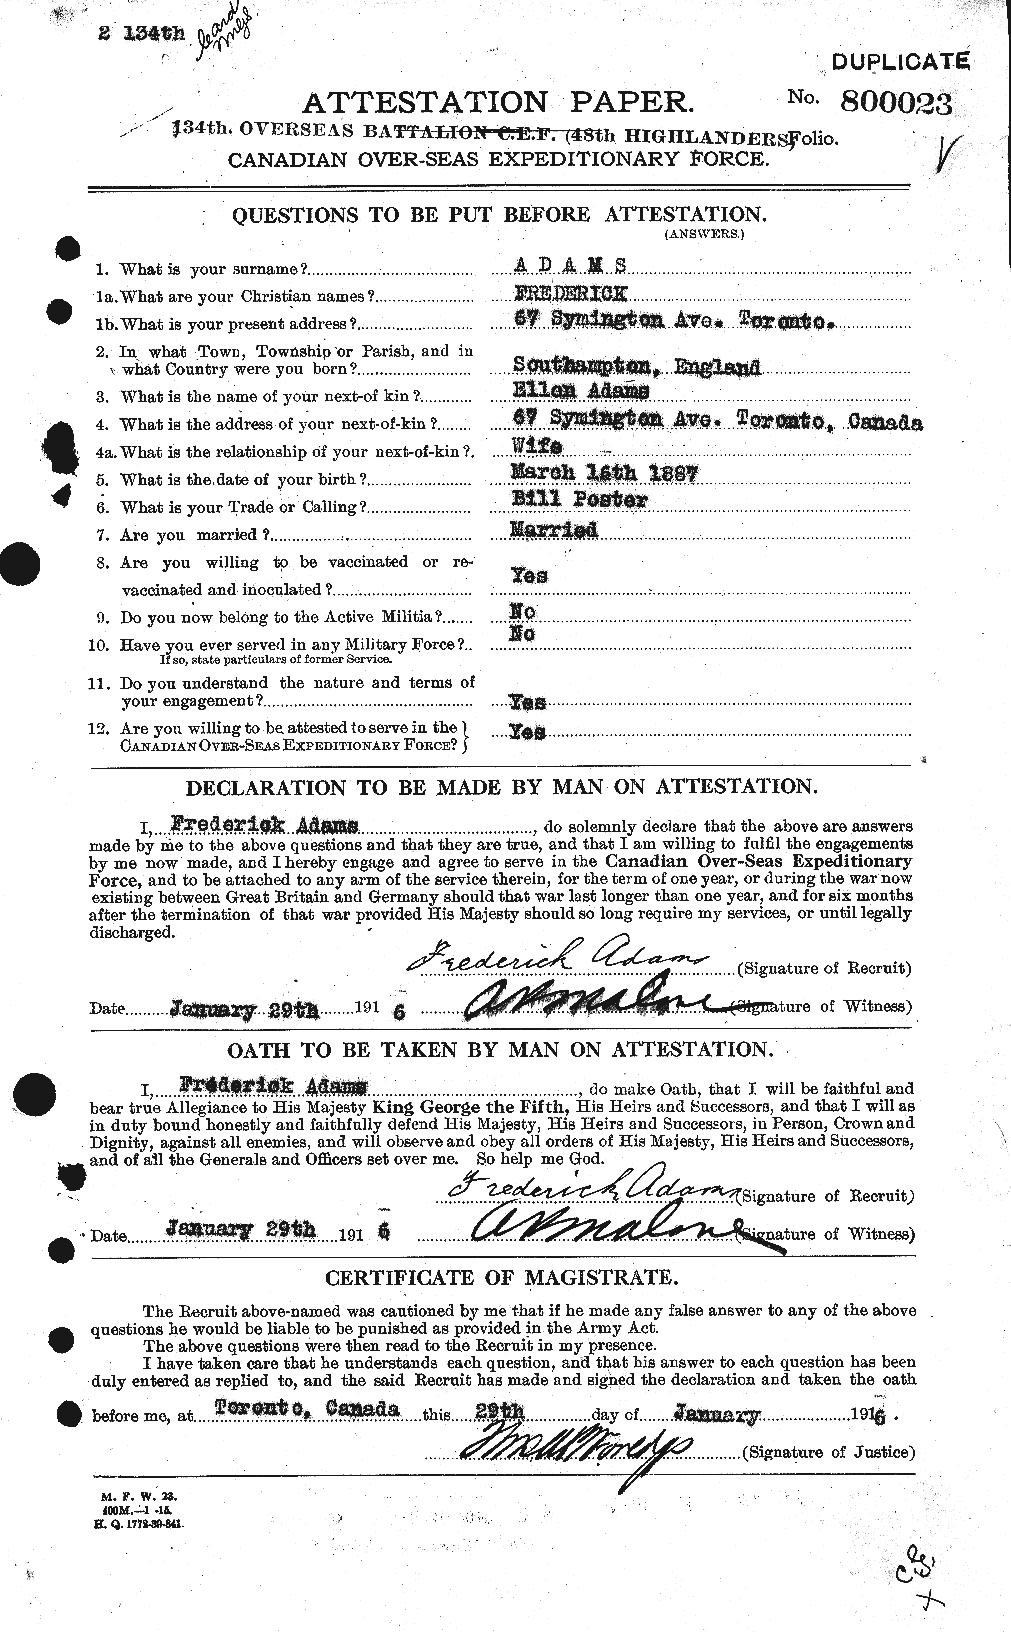 Personnel Records of the First World War - CEF 202688a